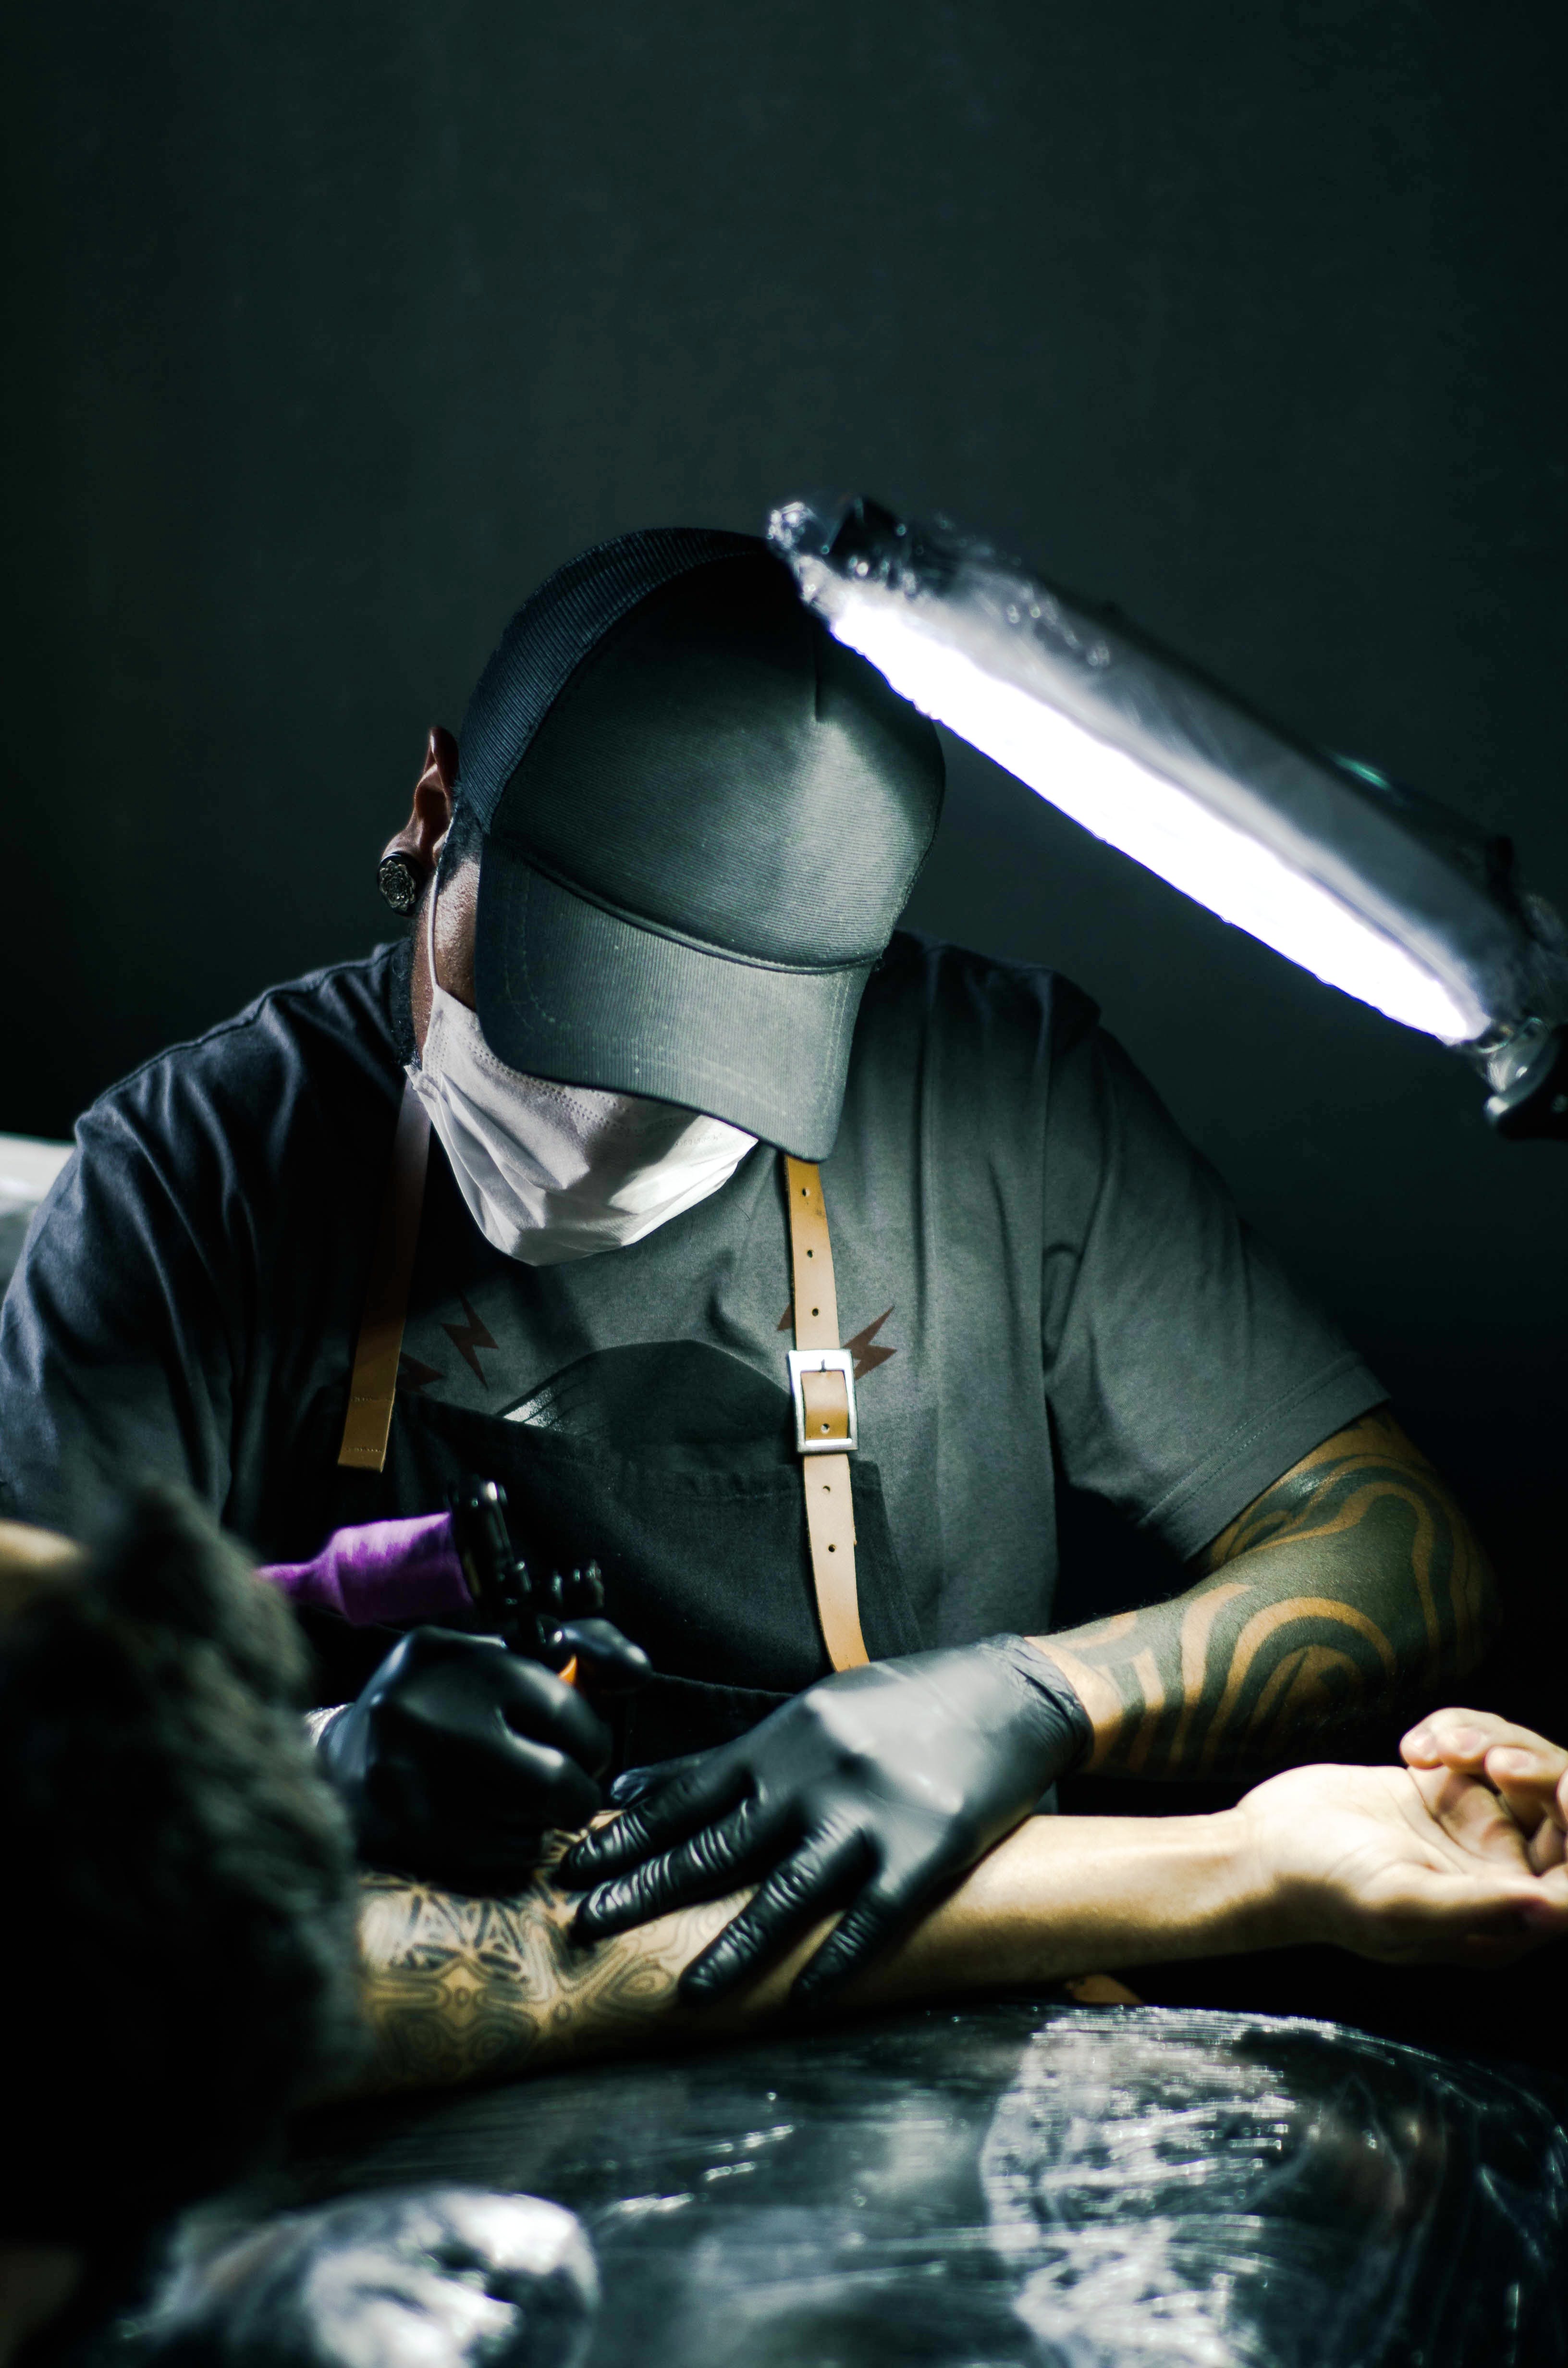 Hand,Darkness,Personal protective equipment,Room,Photography